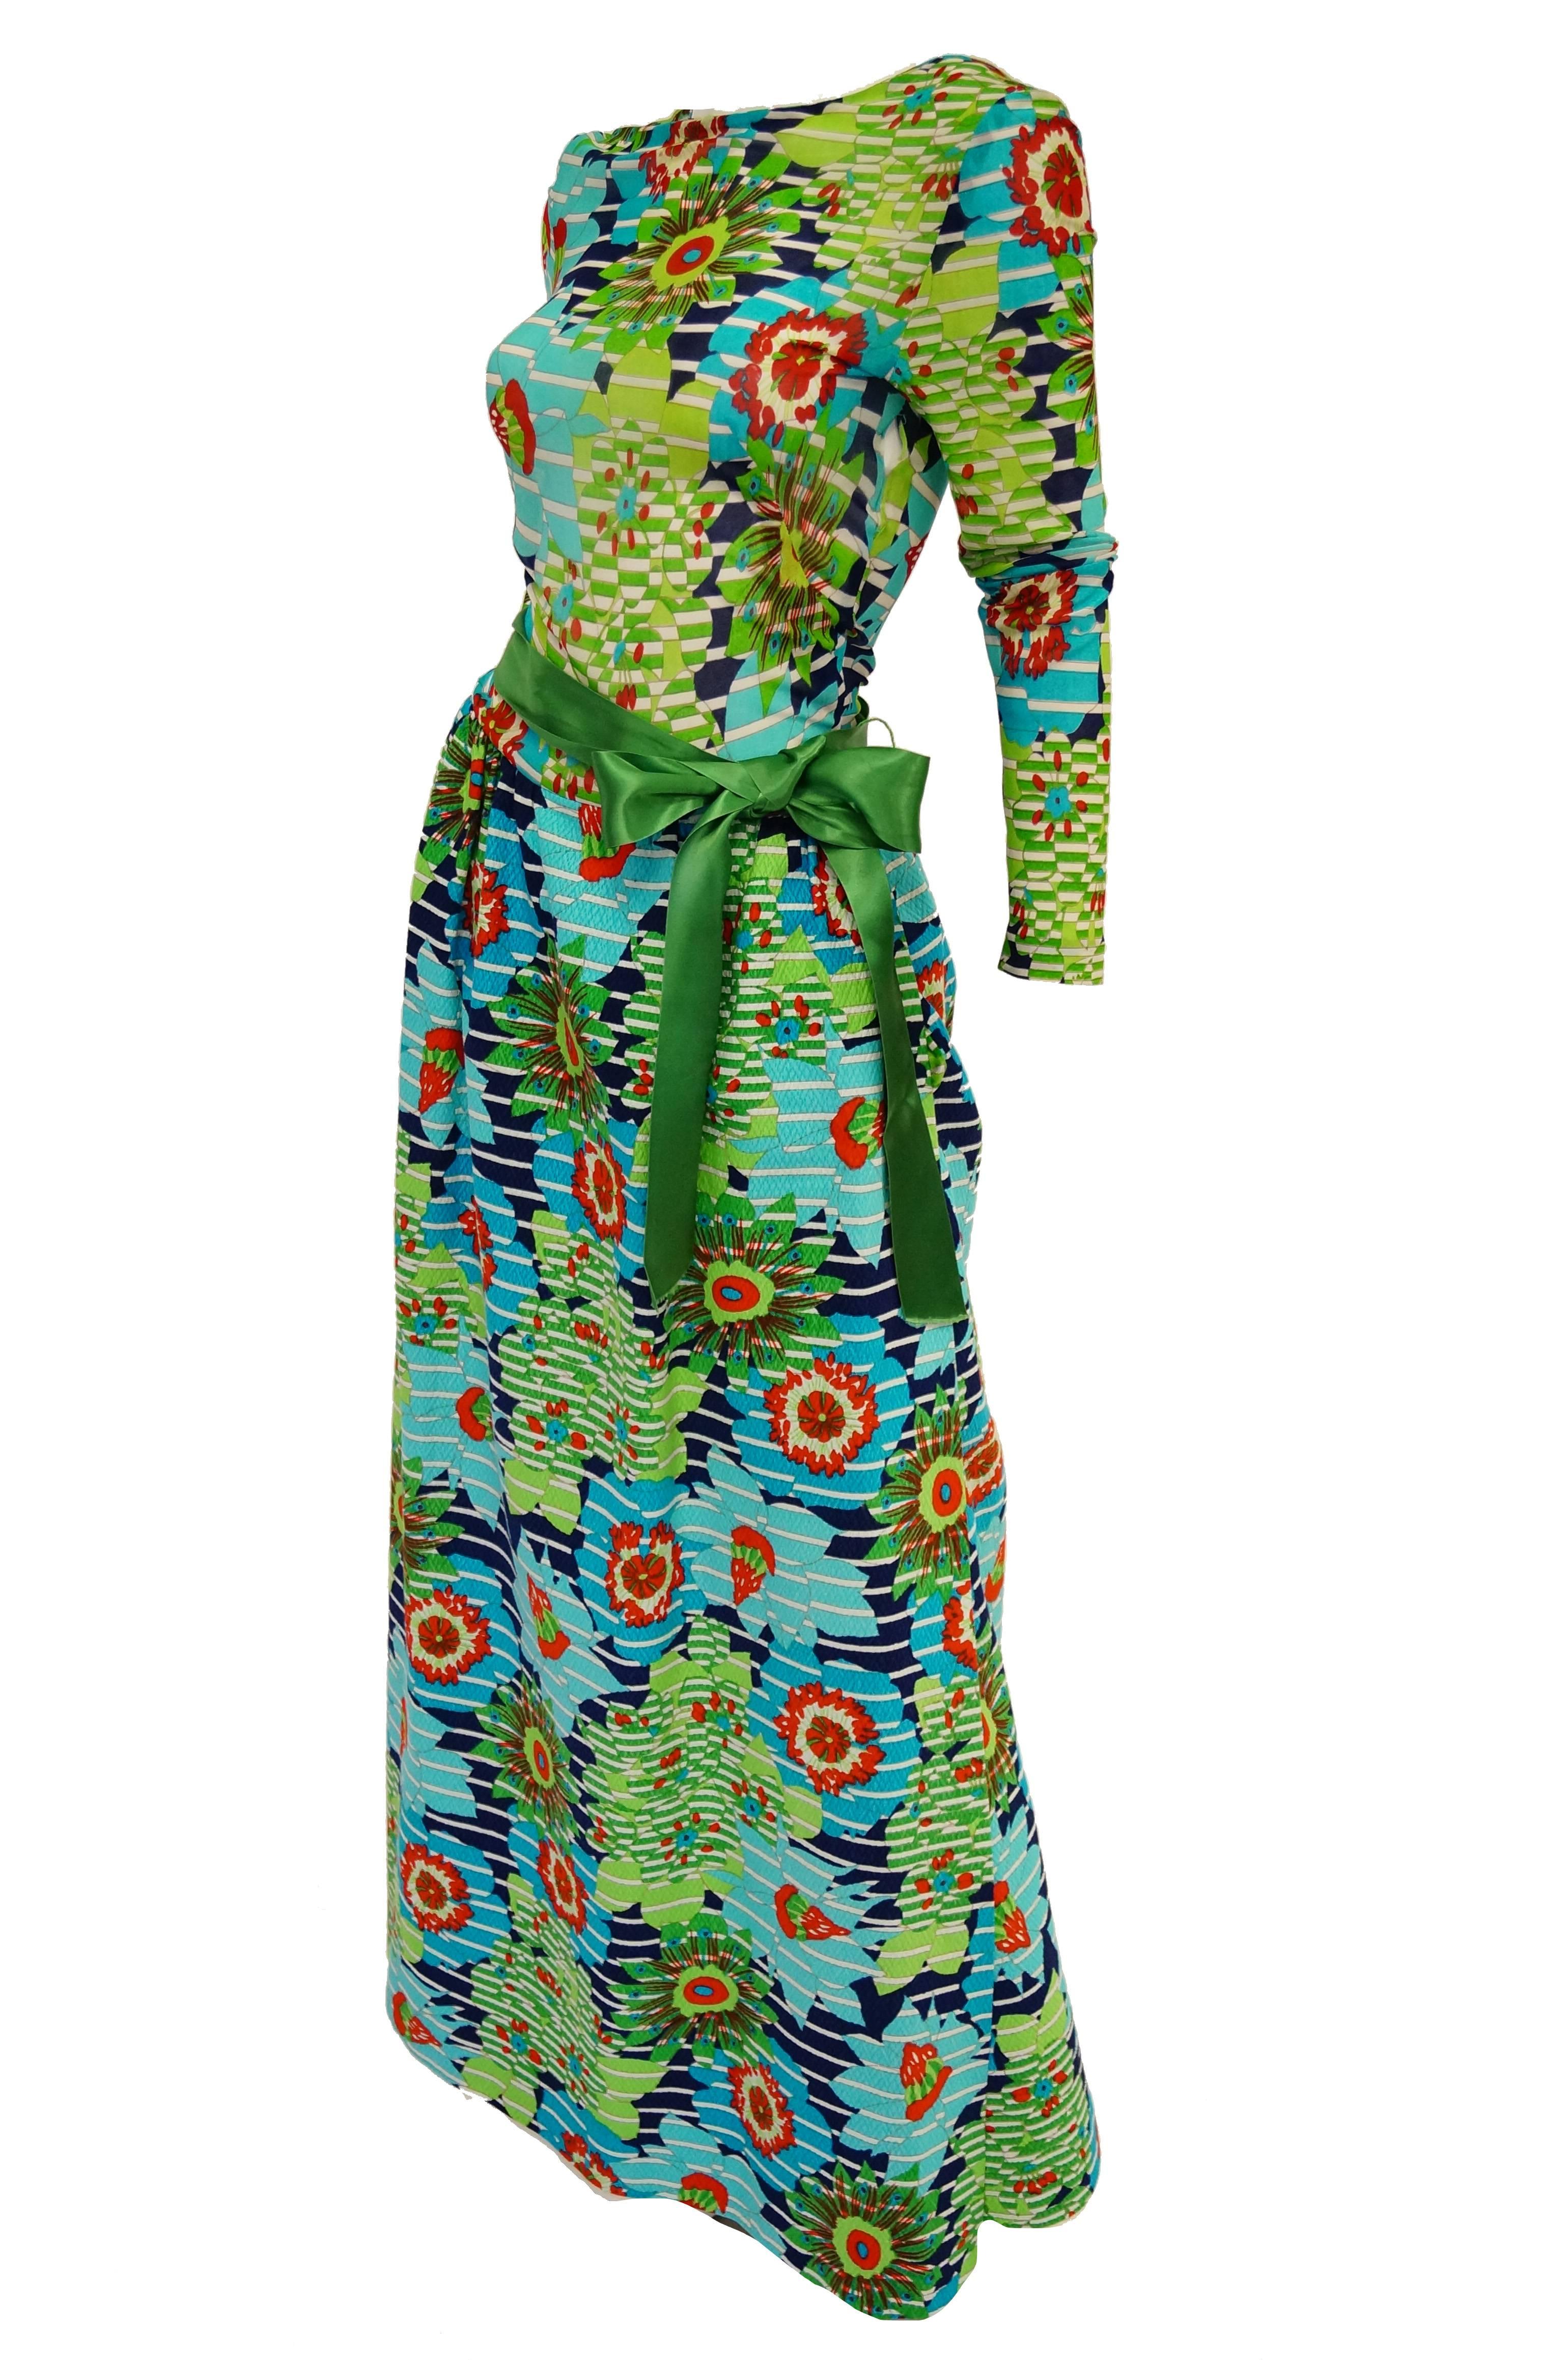  Lanvin Green and Blue Floral Dress with Sheer Bodice and Scoop Back, 1970s  In Excellent Condition For Sale In Houston, TX